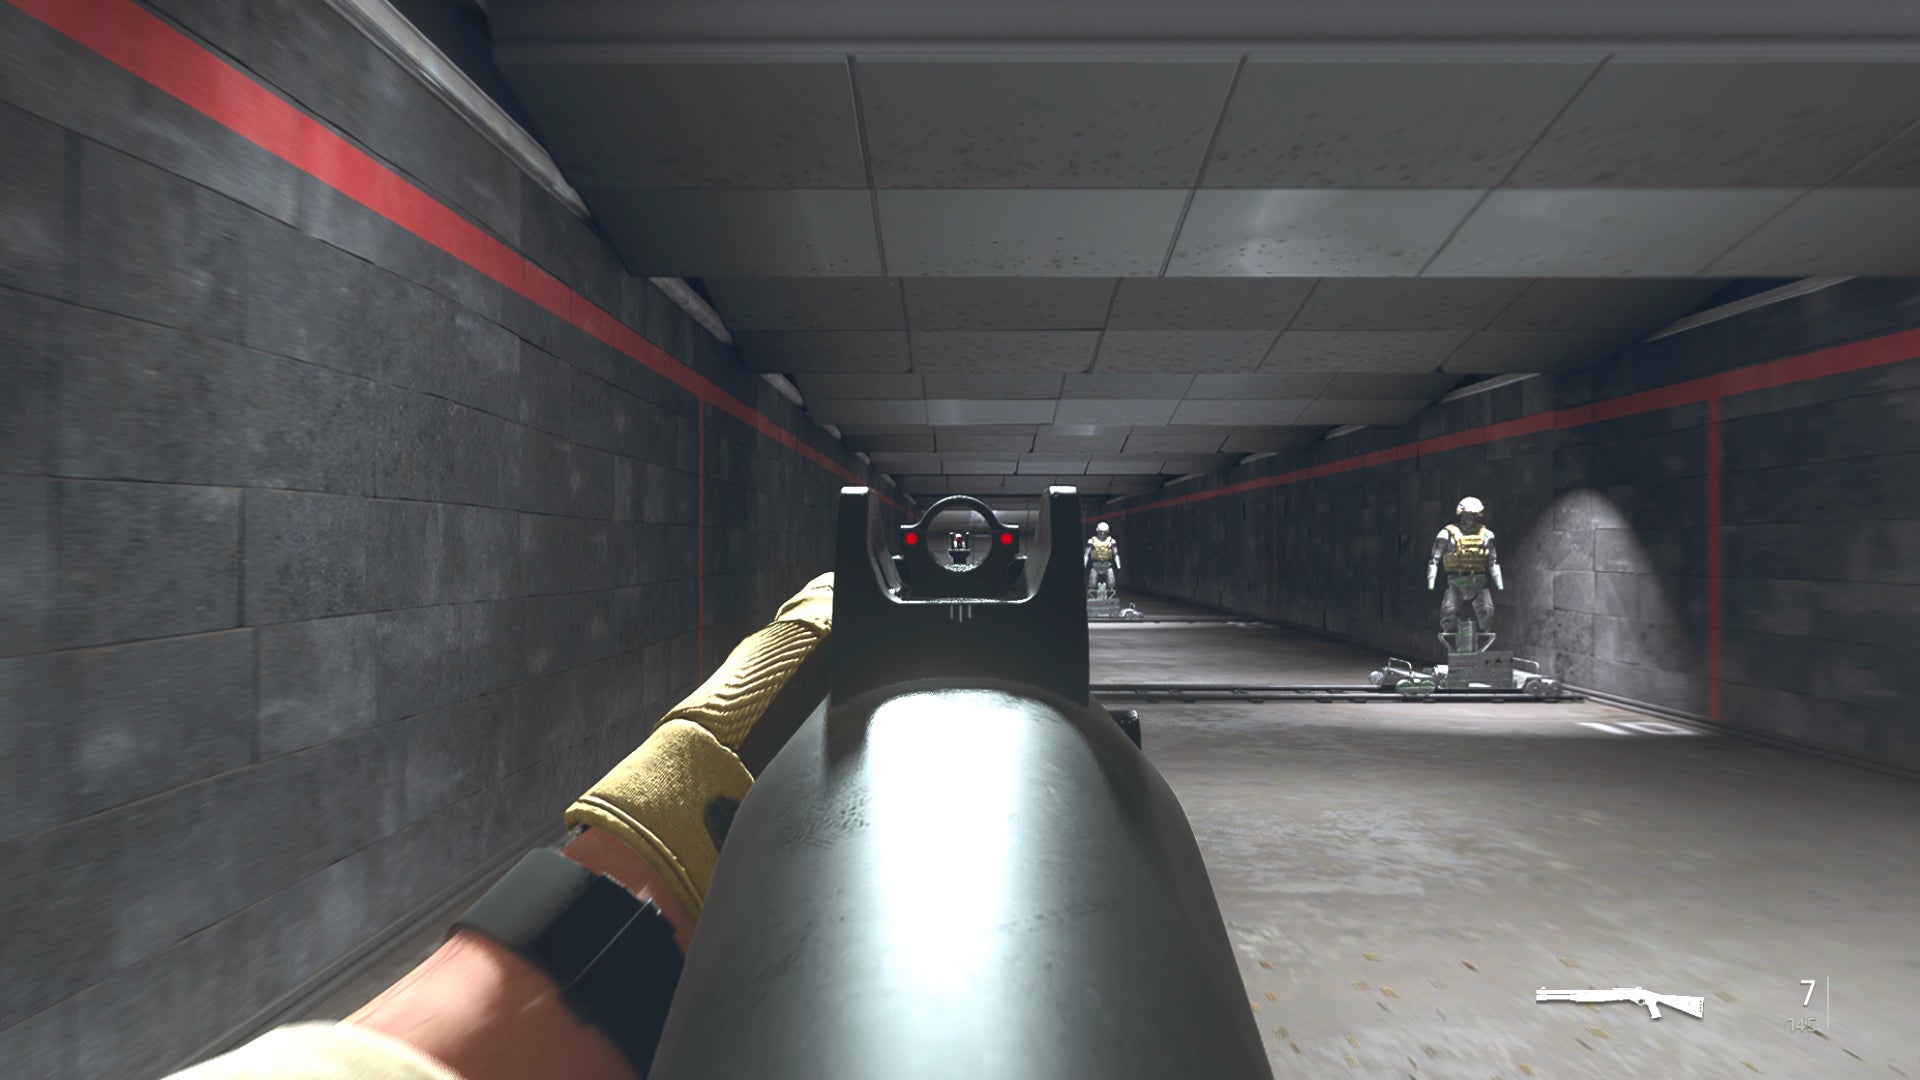 The player in Warzone 2.0 aims at a training dummy with the Expedite 12 ironsights.